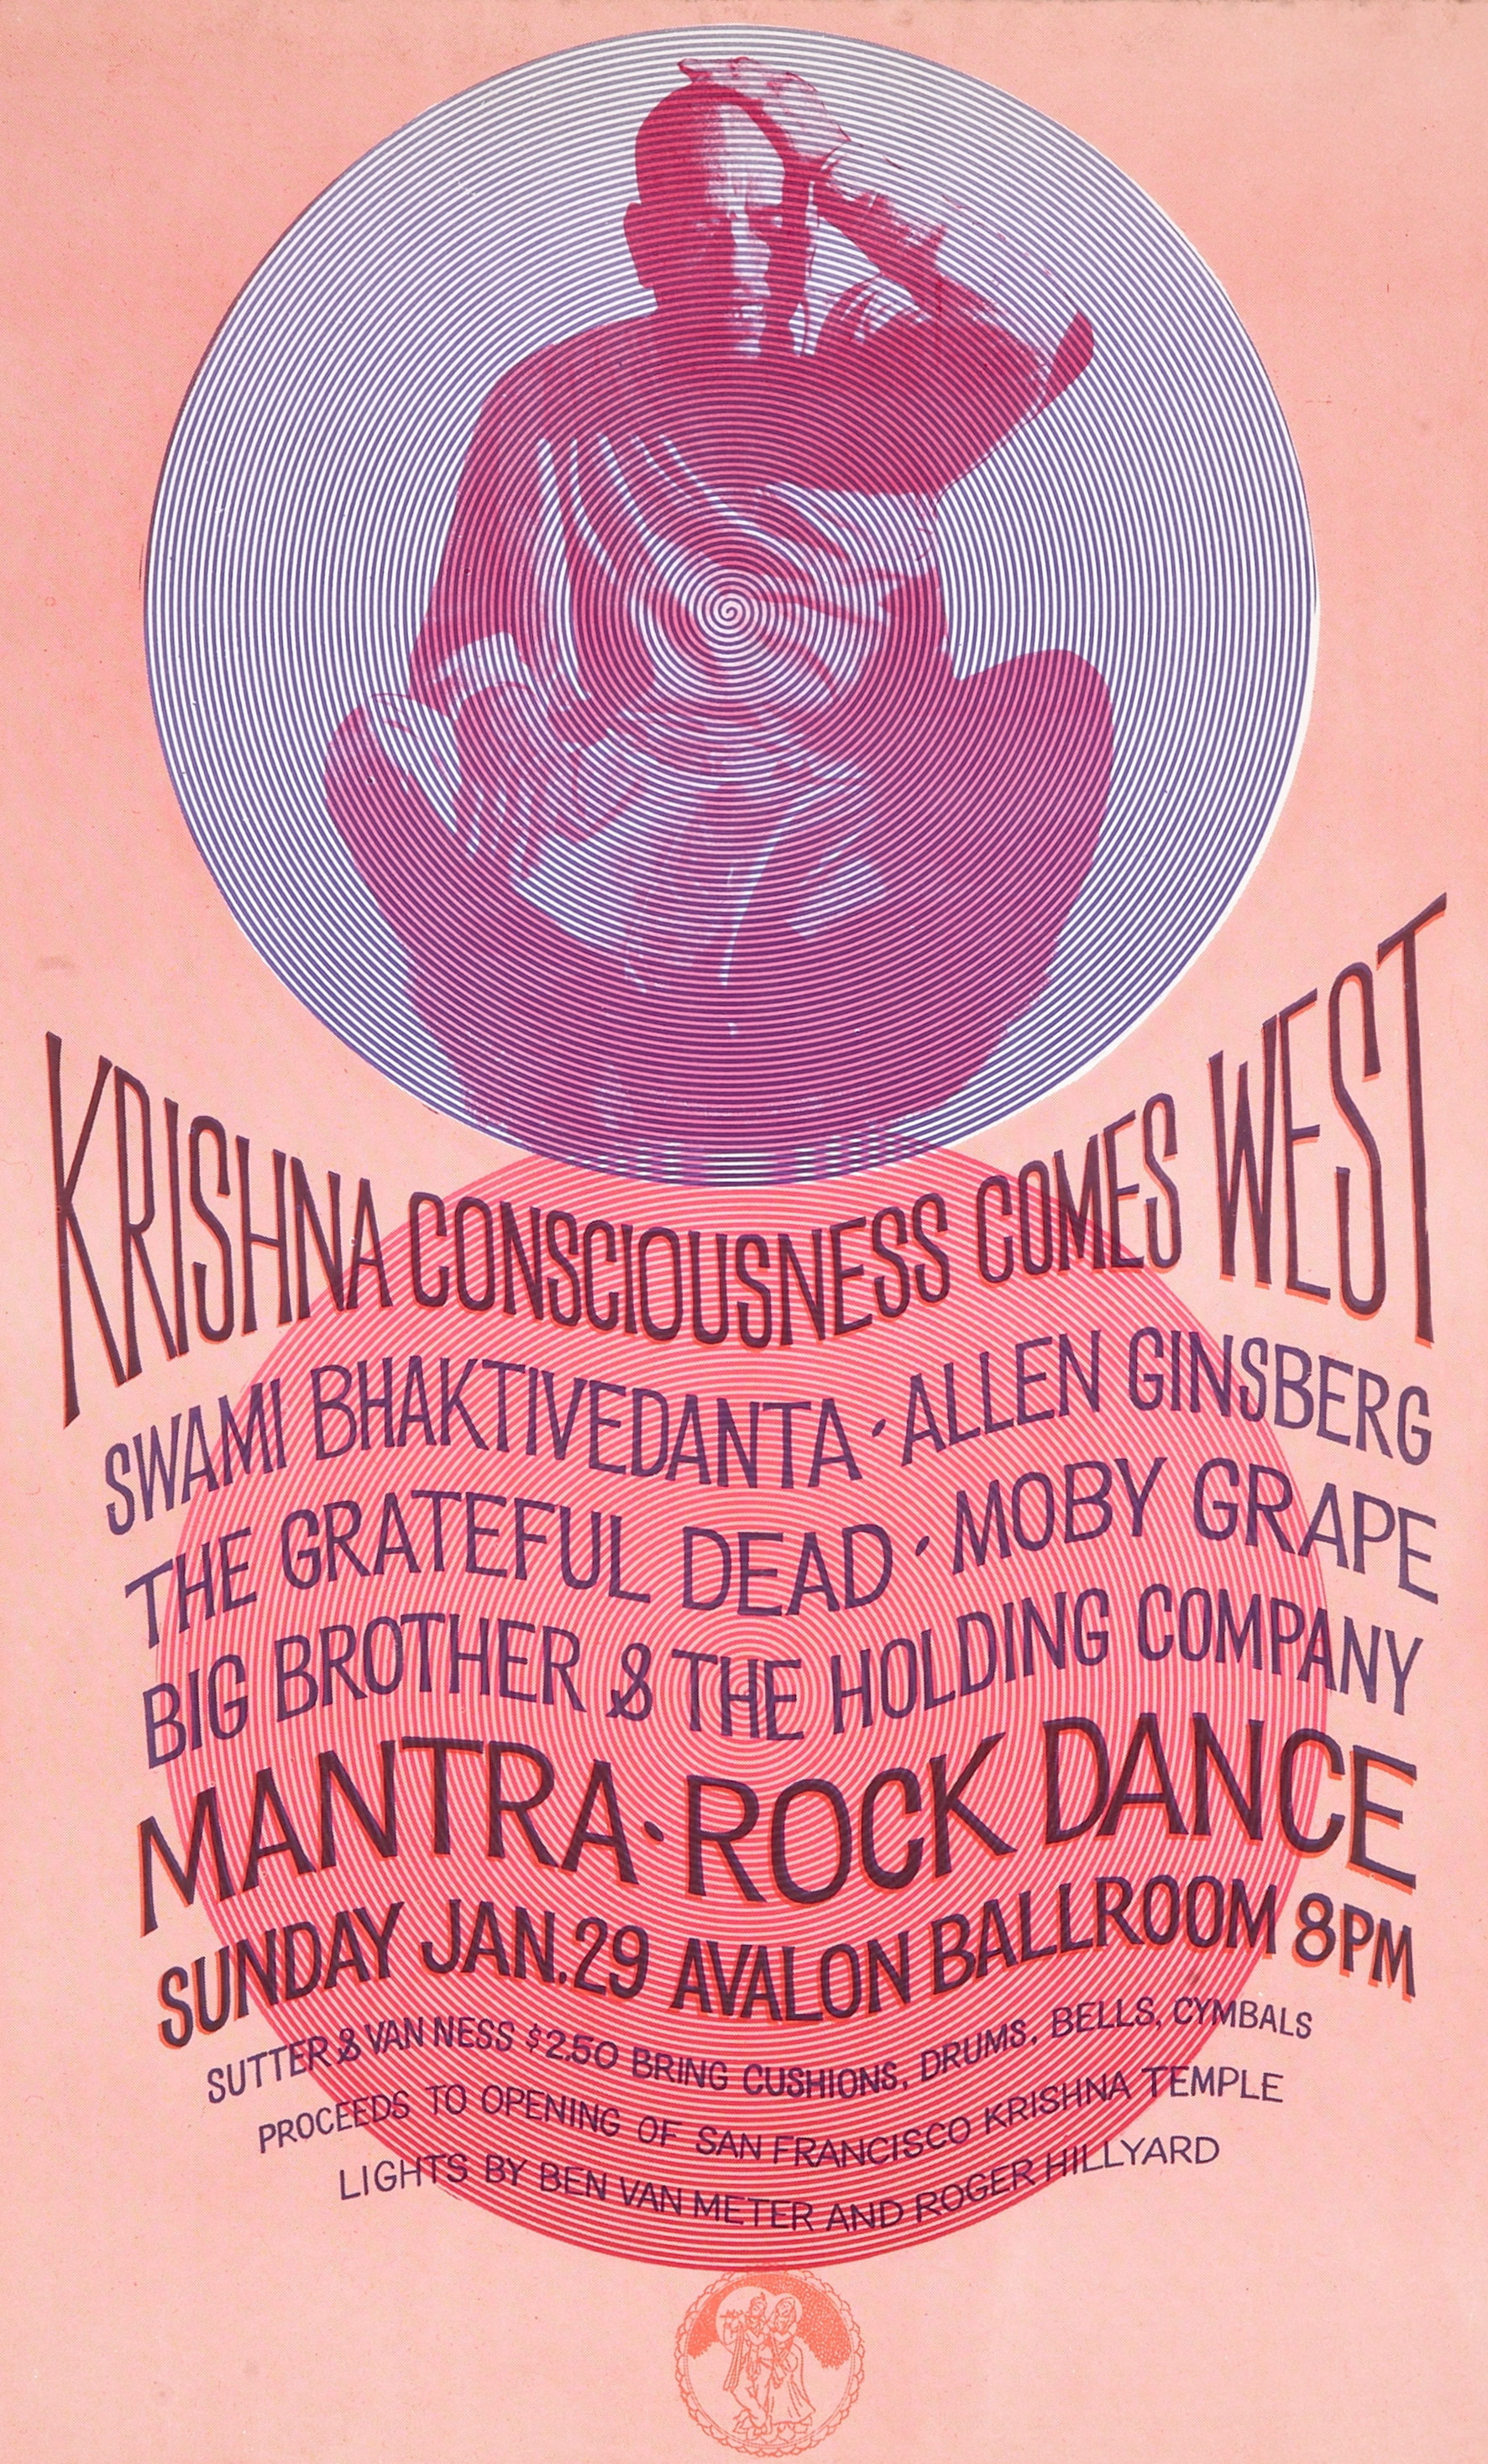 1772x2935 The Mantra-Rock Dance promotional poster featuring the Grateful Dead